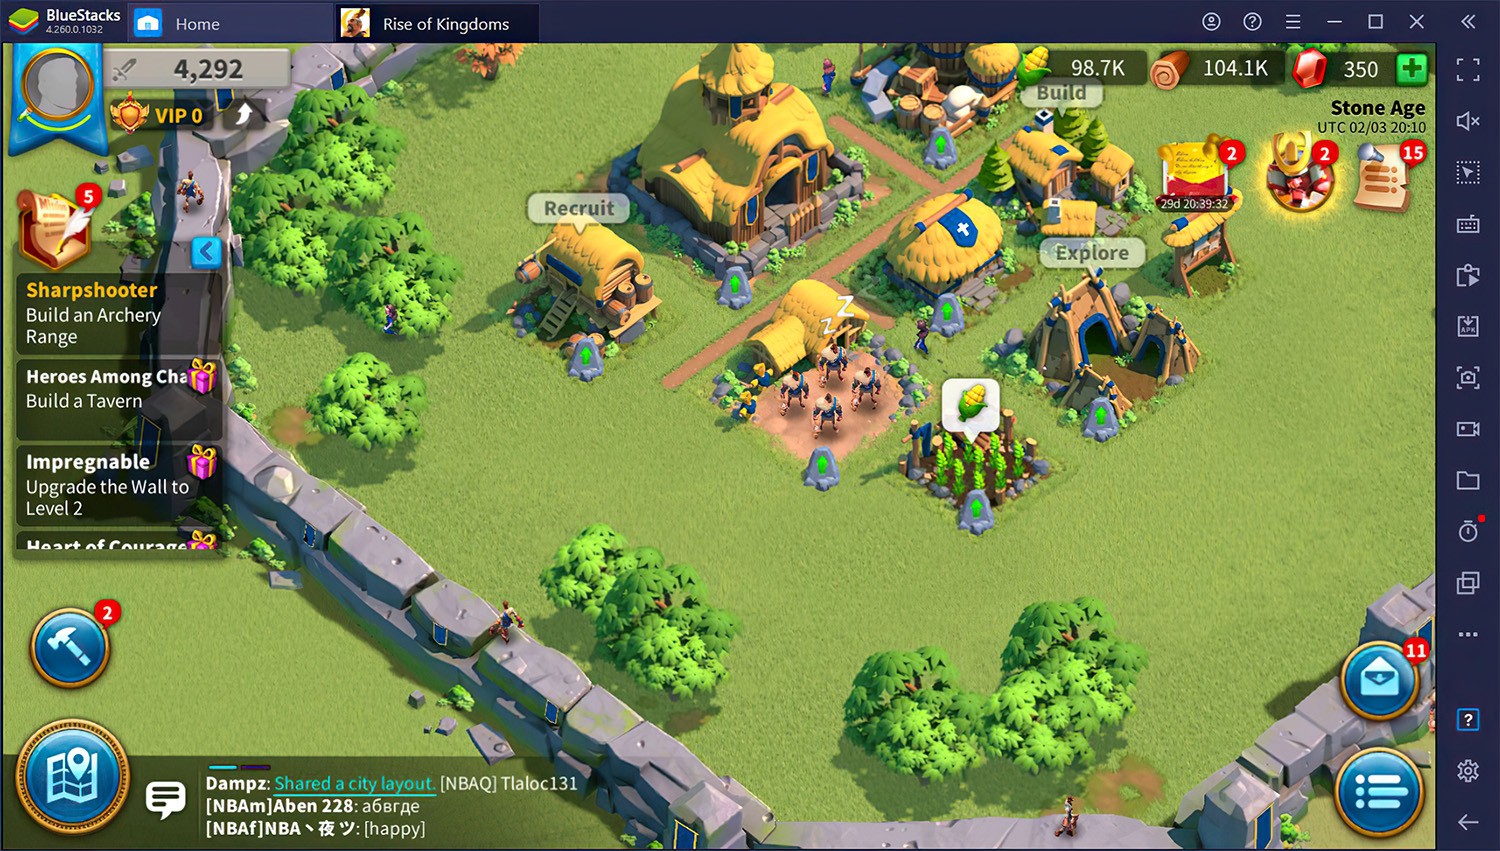 BlueStacks 4 Recap - What Have We Been Up to Since the Launch?